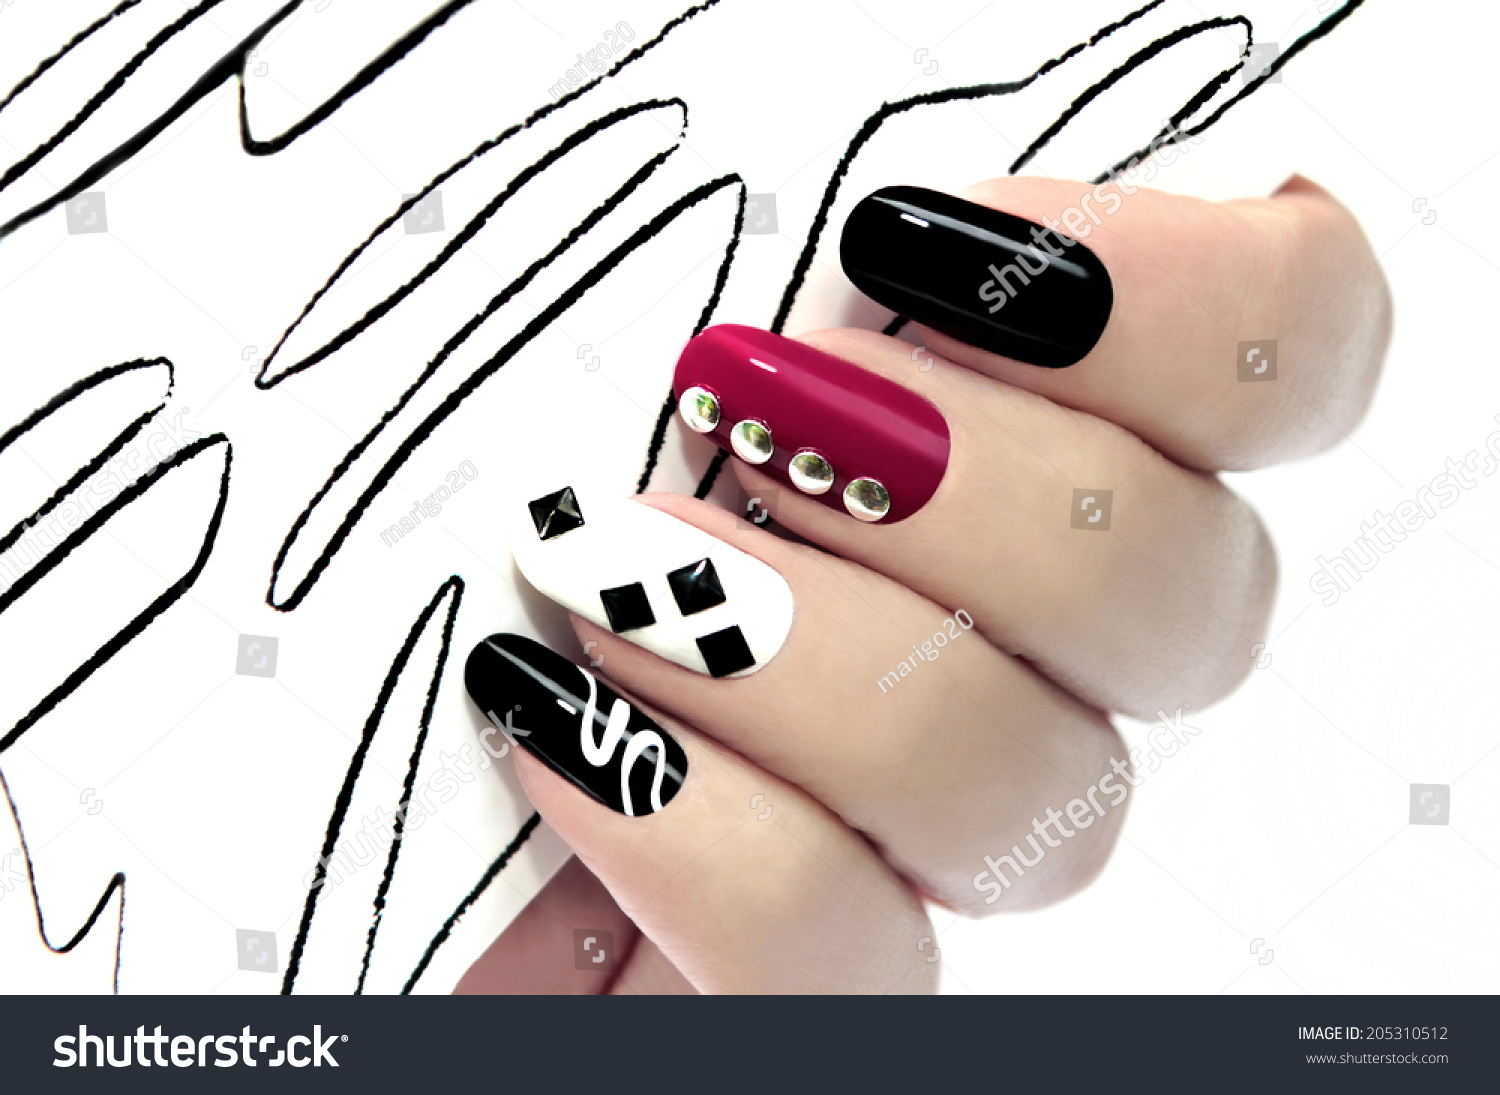 Colorful graphic manicure on an oval shaped nails are covered with black,white,red lacquer. #205310512